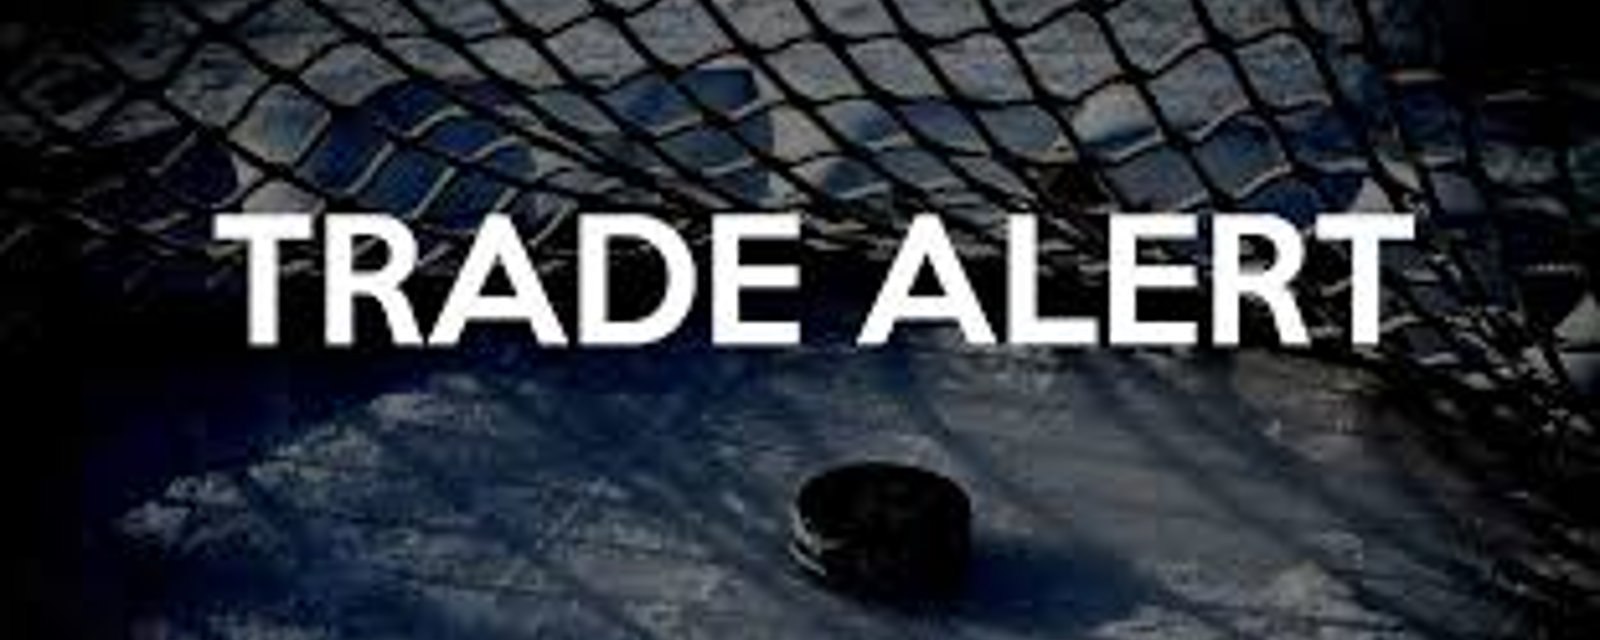 BREAKING: Late night trade in the NHL!